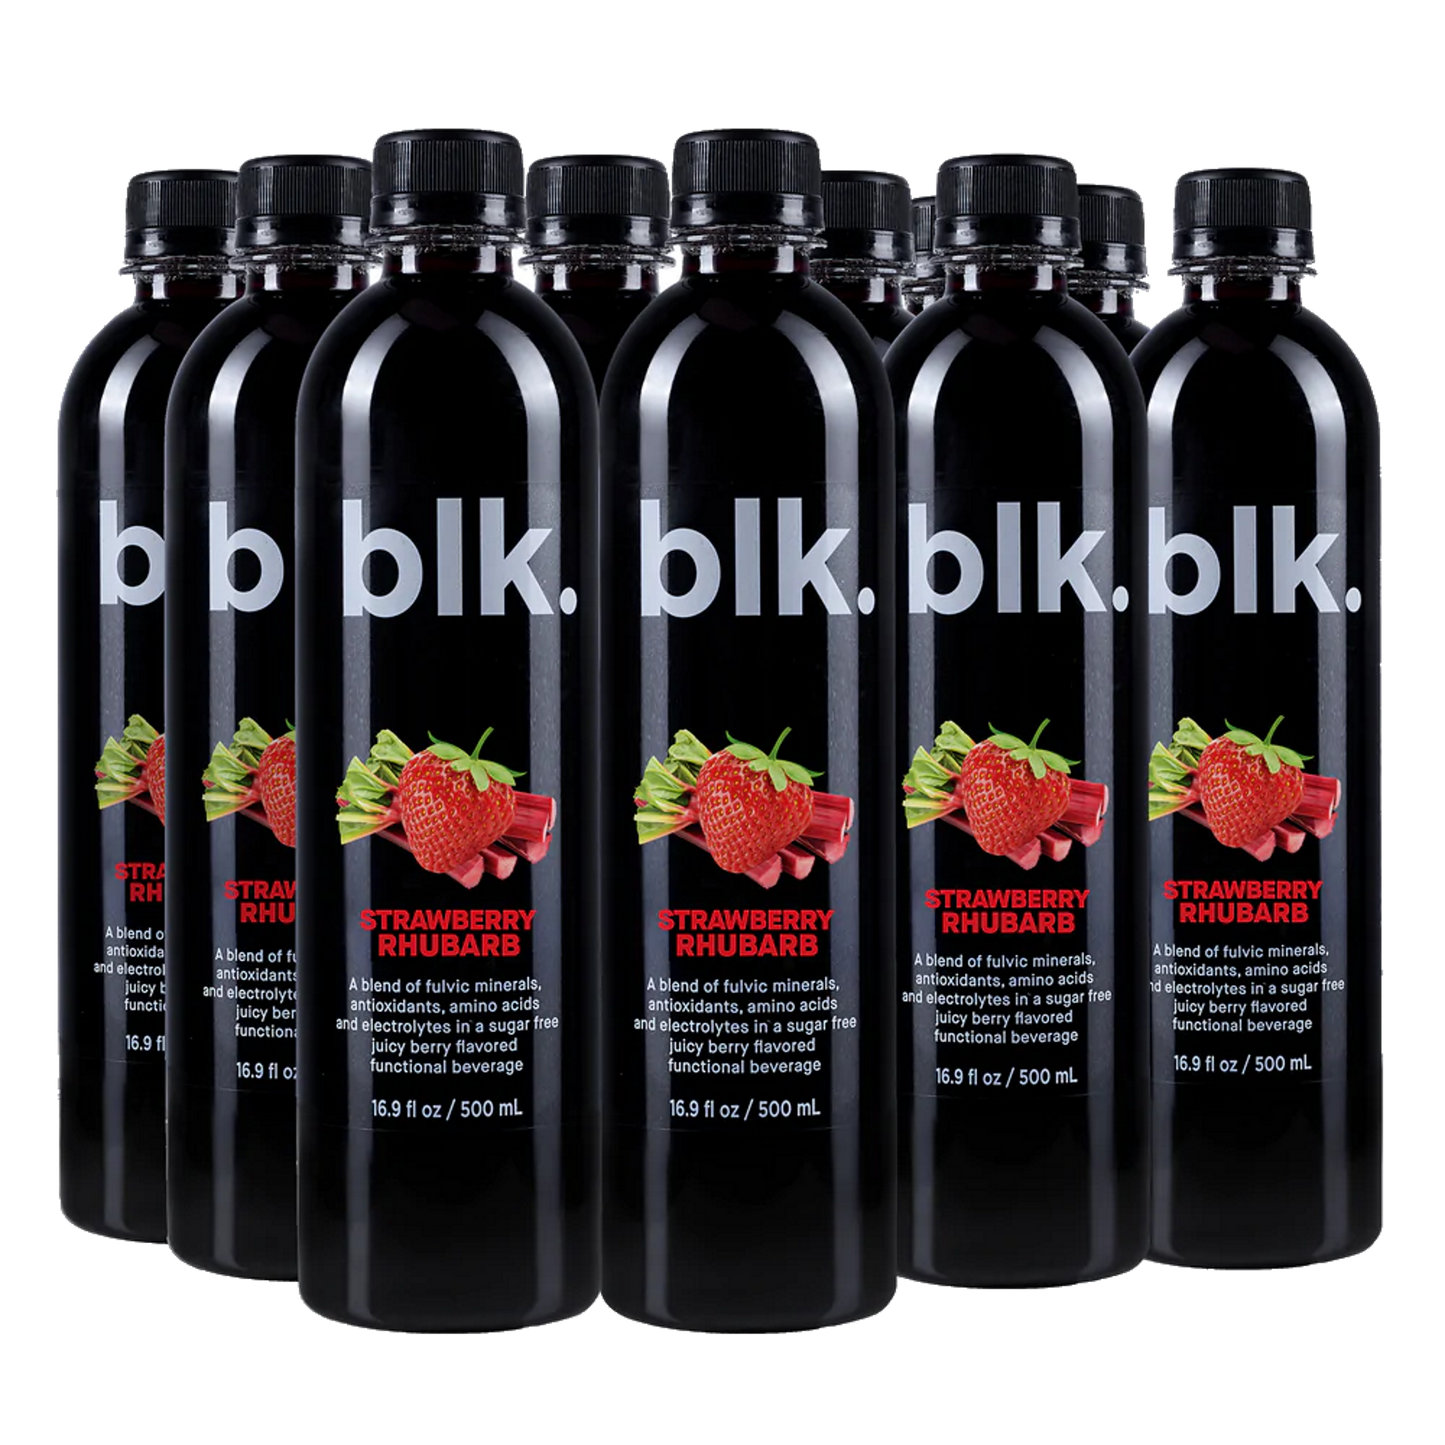 blk strawberry rhubarb - ridiculously good tasting recovery beverage